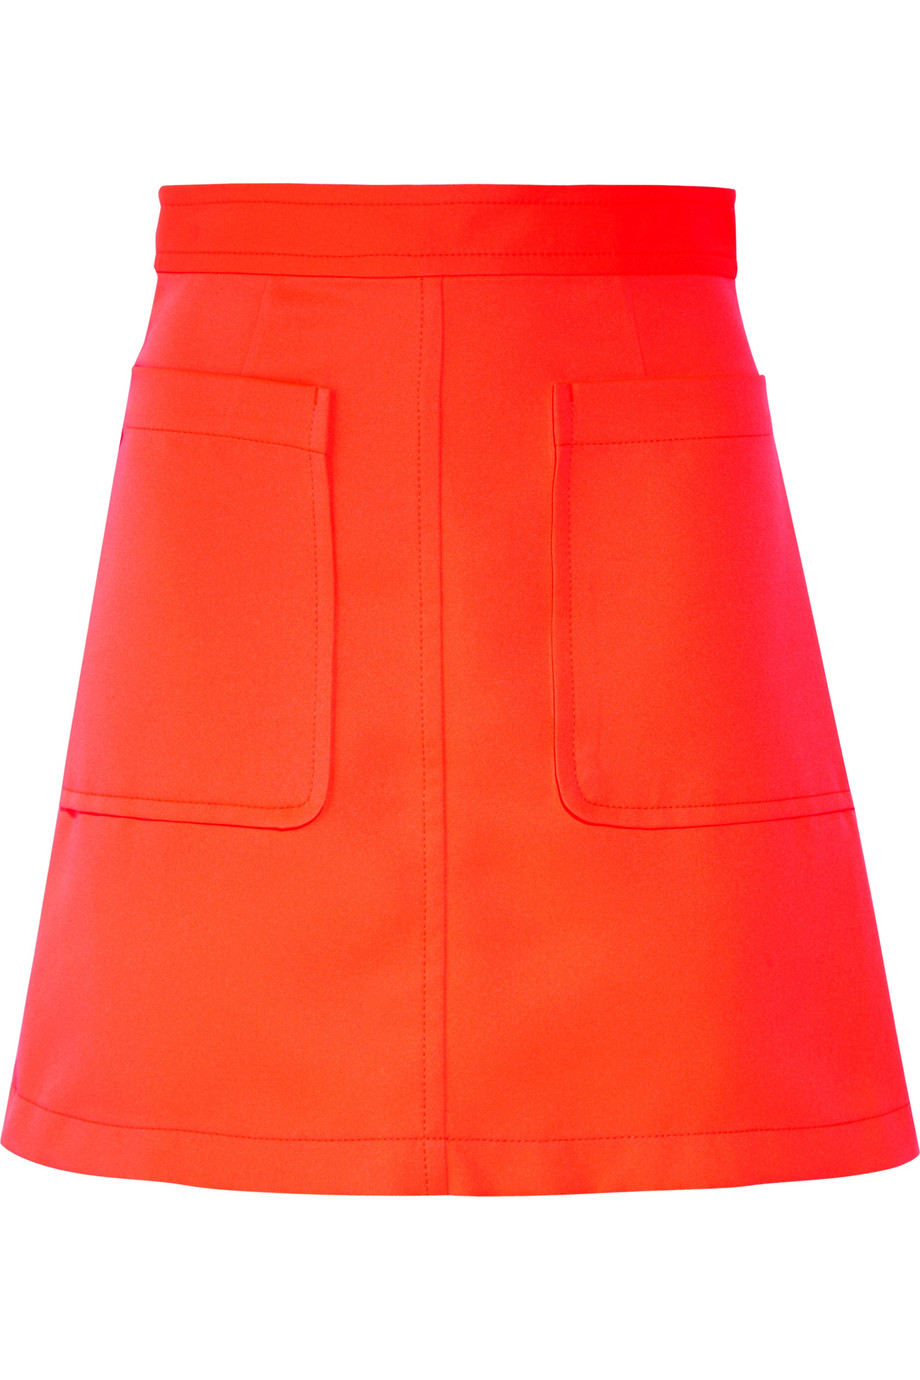 Marc By Marc Jacobs Esther Oxford Neon Twill Skirt in Coral 